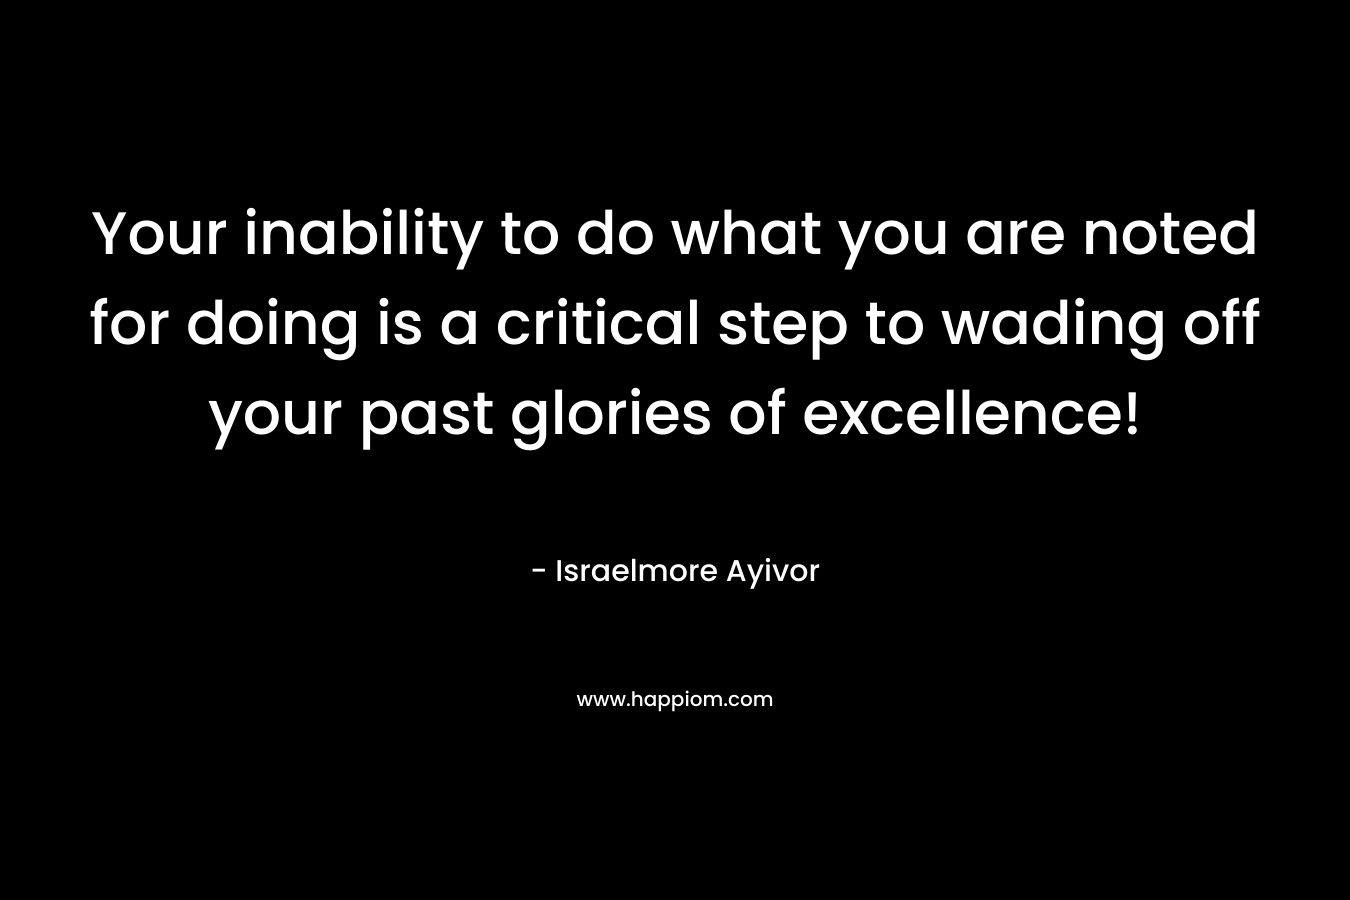 Your inability to do what you are noted for doing is a critical step to wading off your past glories of excellence!